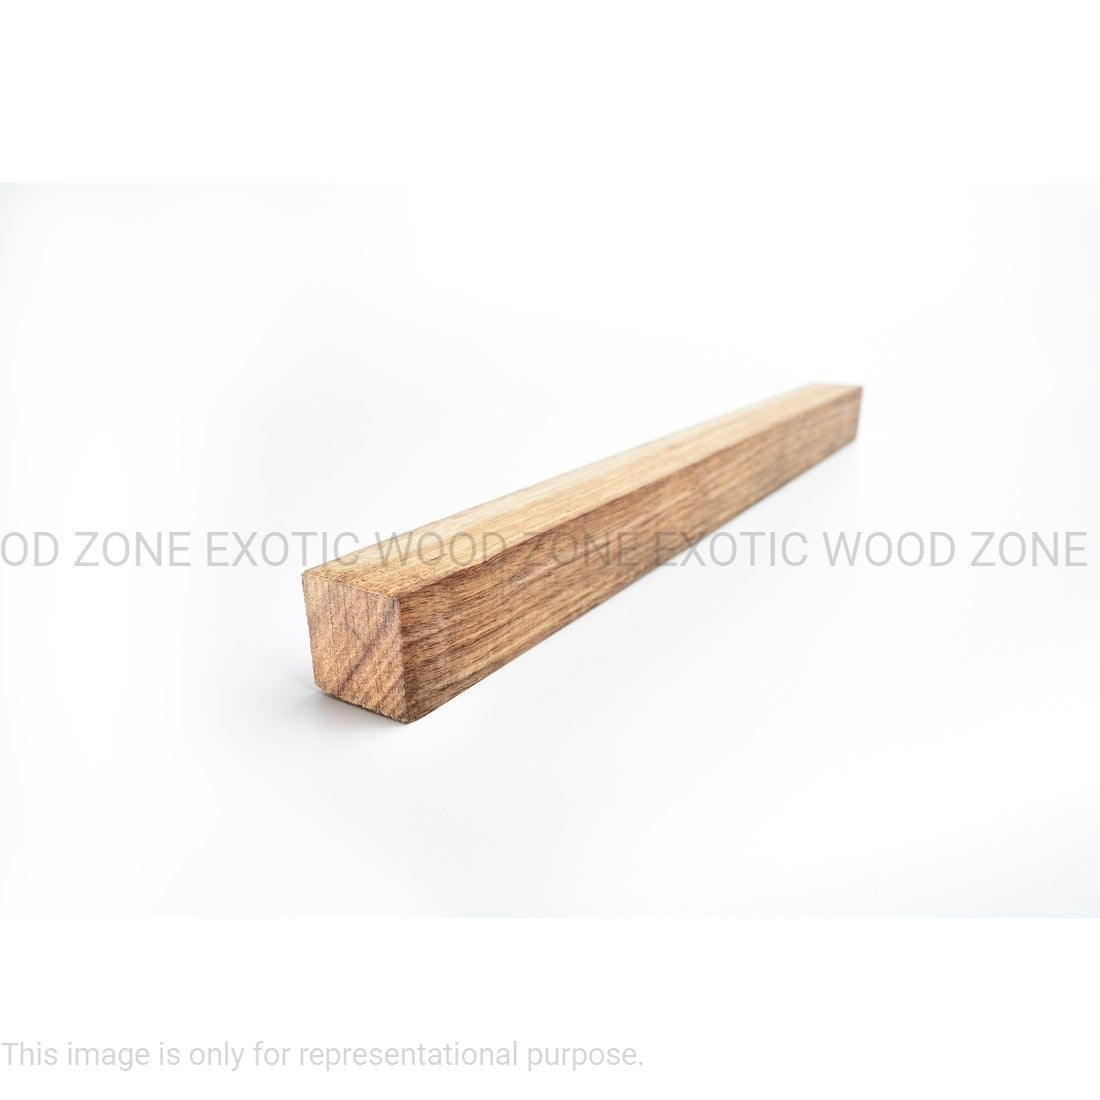 Canarywood Hobbywood Blank 1&quot; x 1 &quot; x 12&quot; inches Exotic Wood Zone